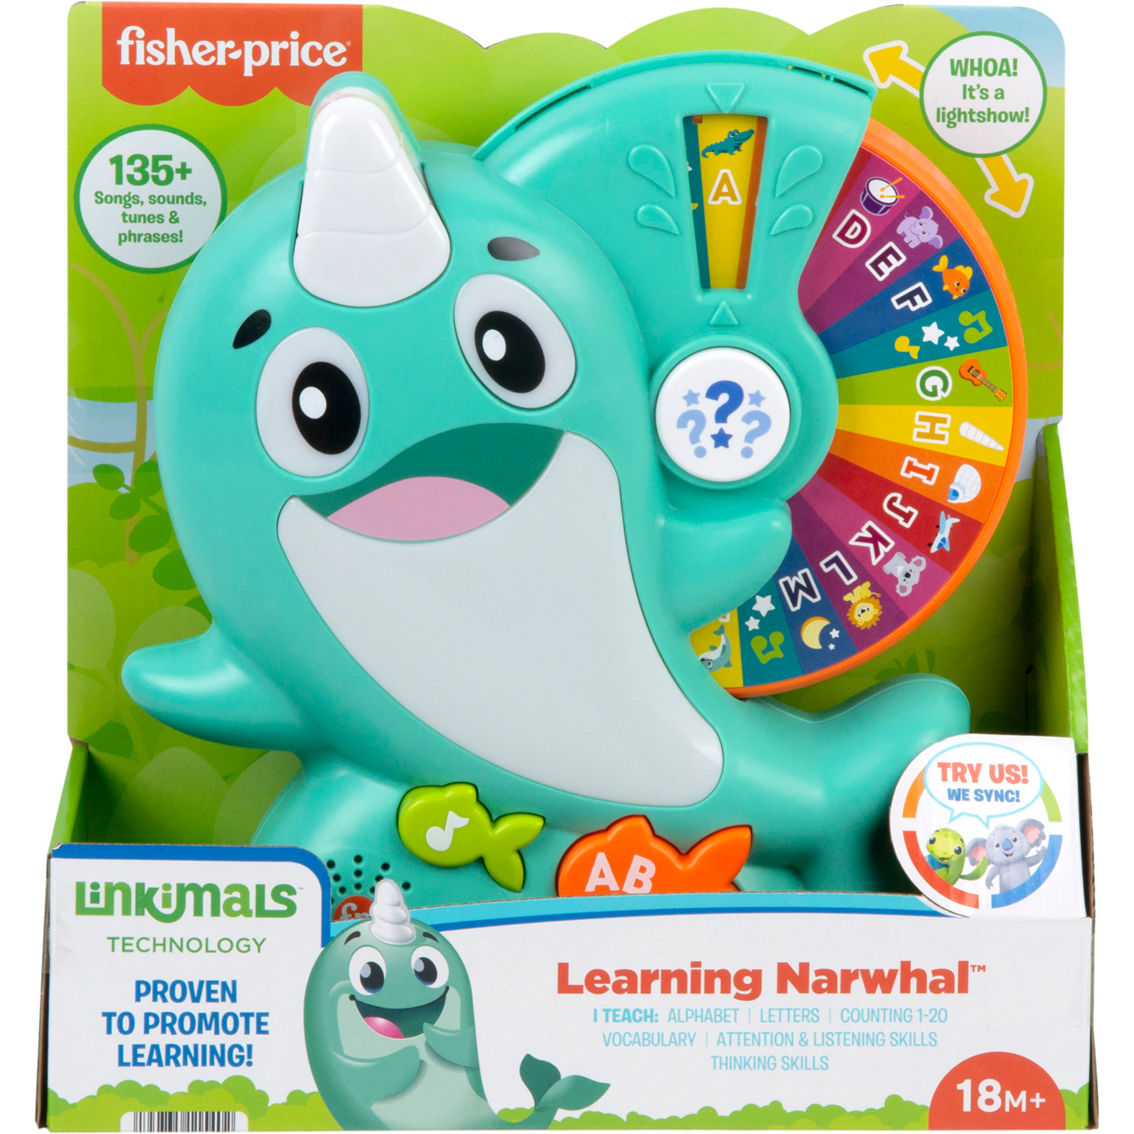 Fisher-Price Linkimals Letters & Learning Narwhal - Image 1 of 4